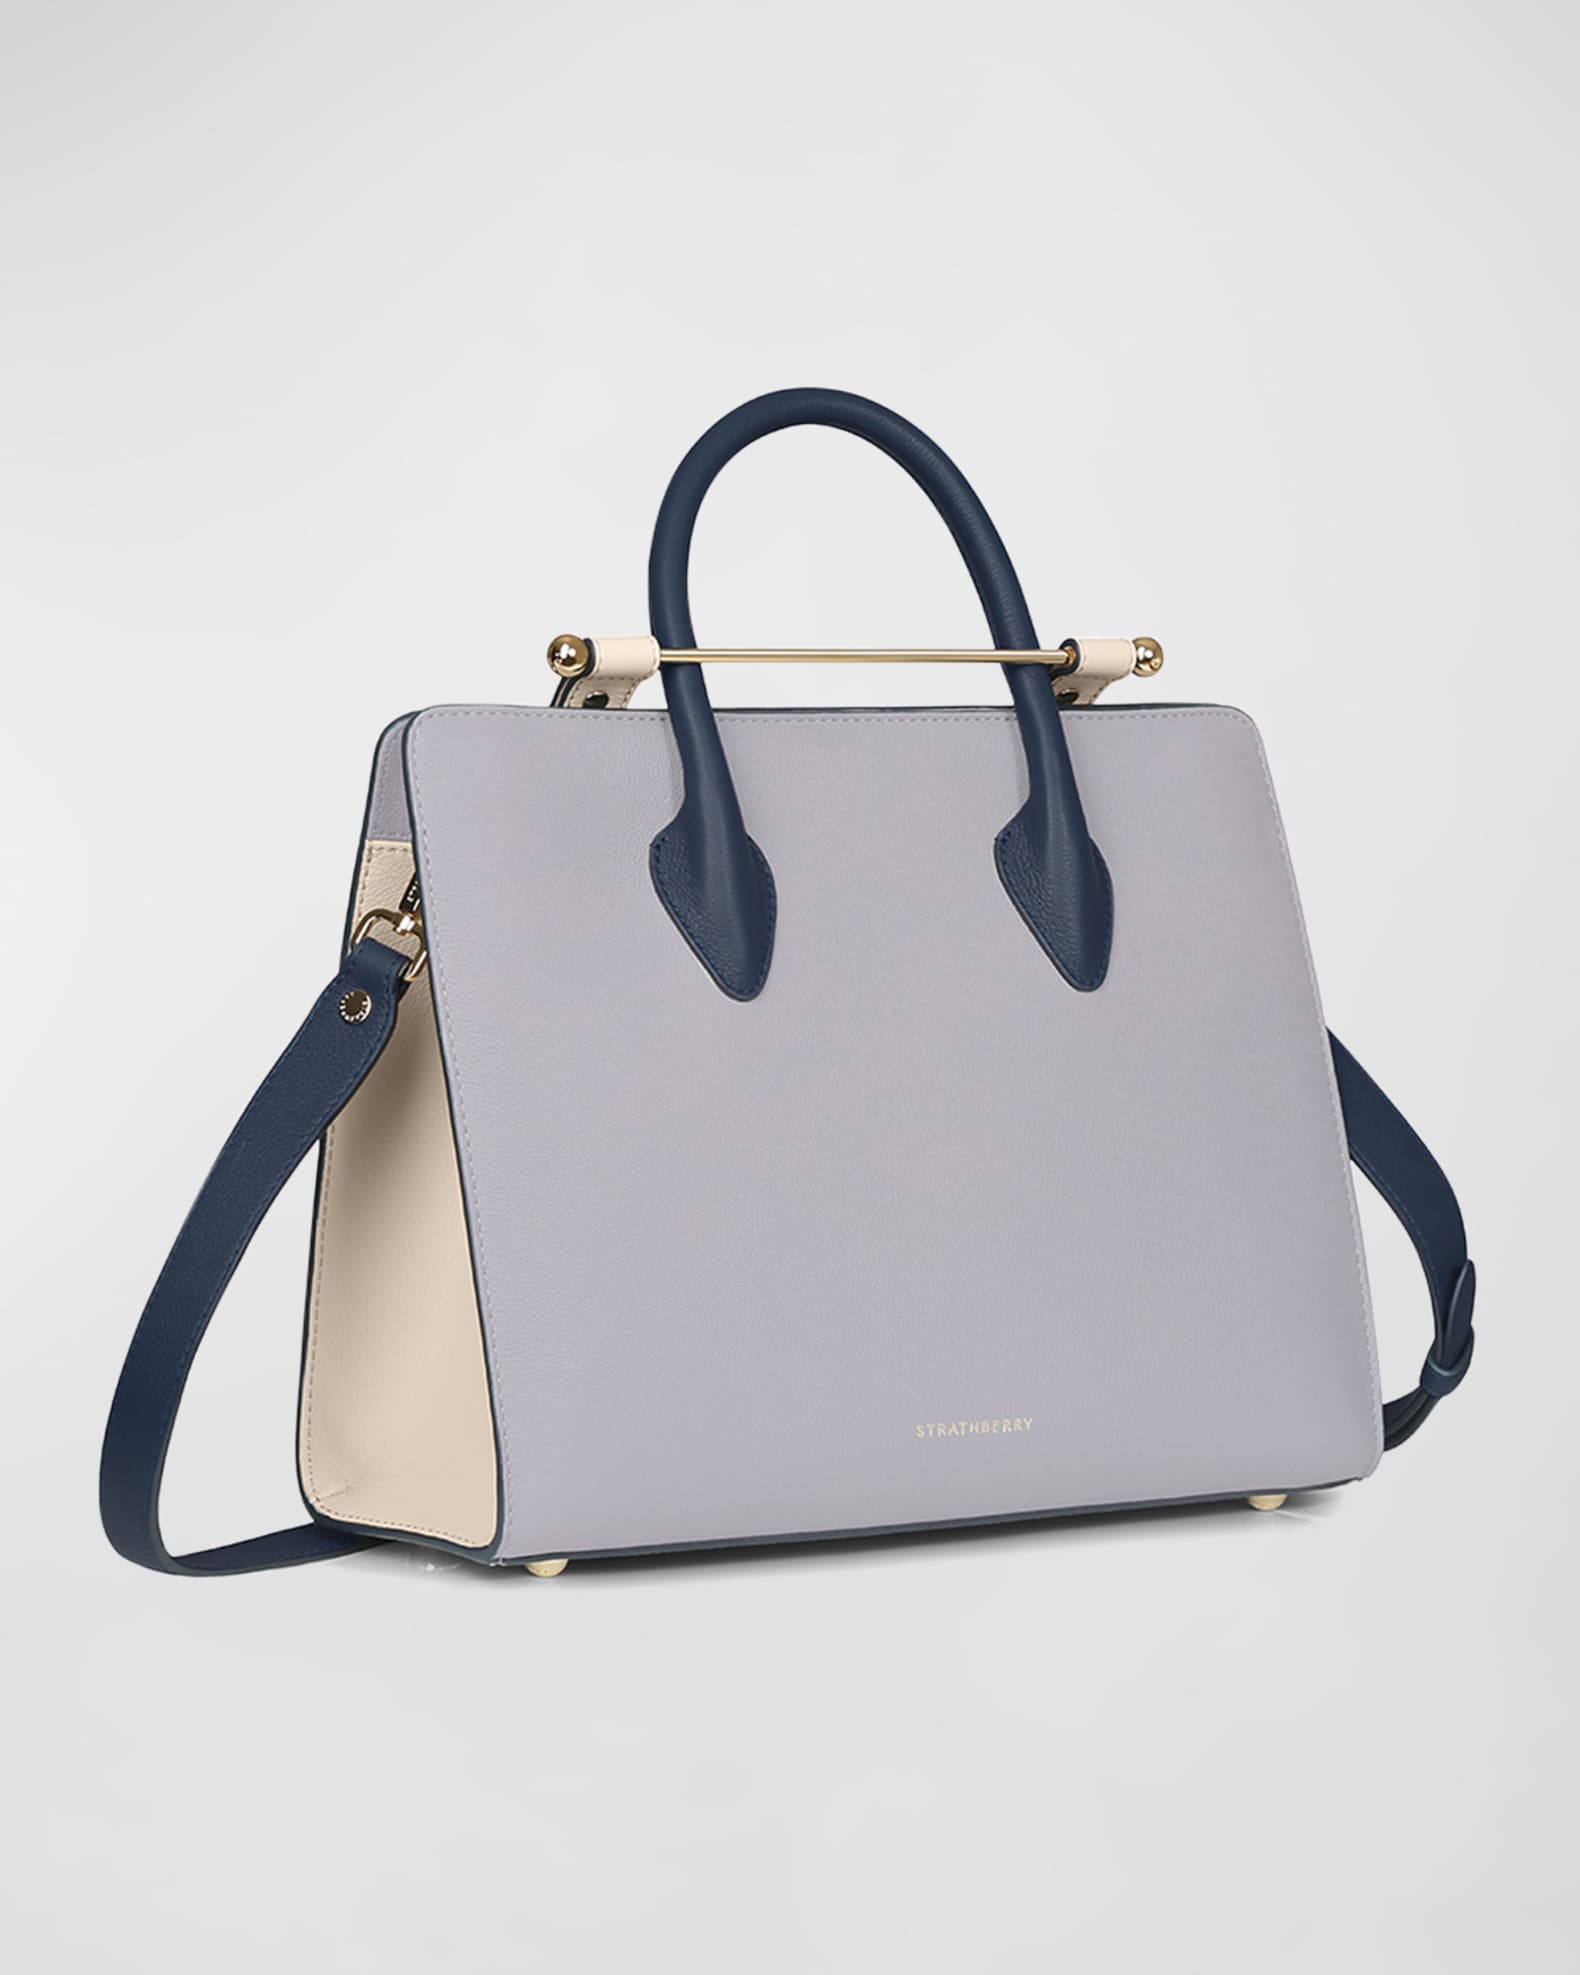 Strathberry Tri Color Leather Midi Tote Strathberry